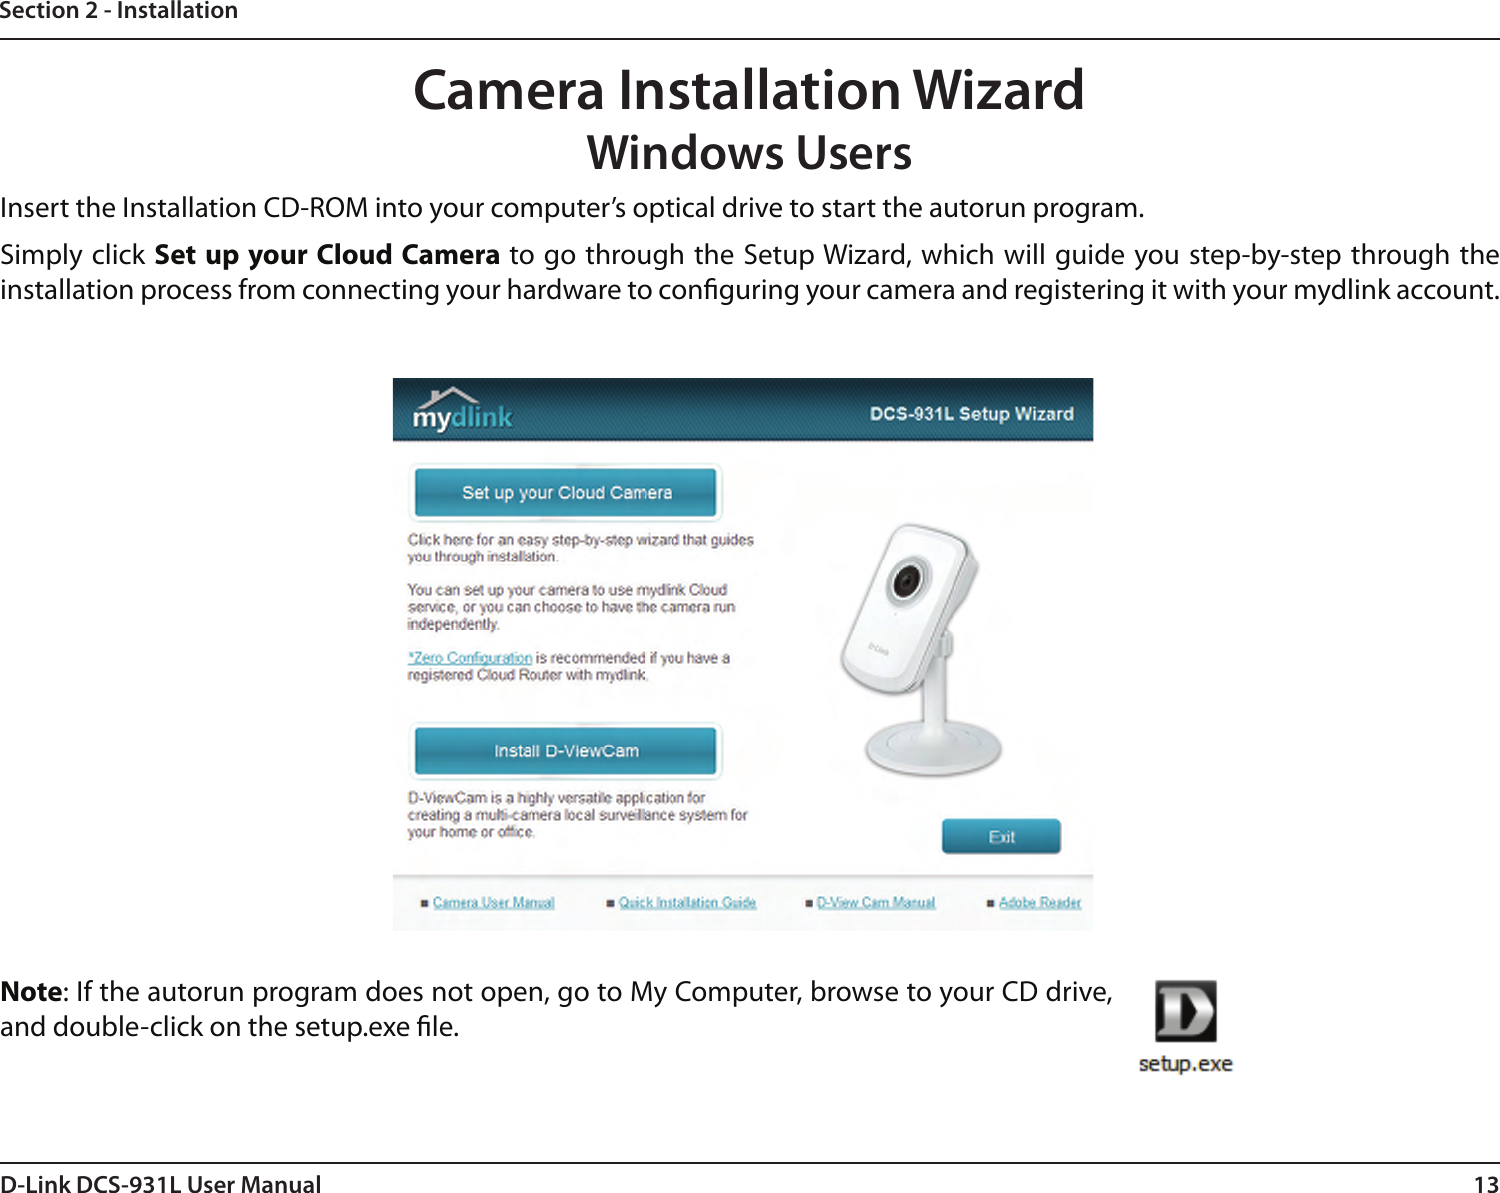 13D-Link DCS-931L User ManualSection 2 - InstallationCamera Installation WizardWindows UsersNote: If the autorun program does not open, go to My Computer, browse to your CD drive, and double-click on the setup.exe le.Insert the Installation CD-ROM into your computer’s optical drive to start the autorun program. Simply click Set up your Cloud Camera to go through the Setup Wizard, which will guide you step-by-step through the installation process from connecting your hardware to conguring your camera and registering it with your mydlink account.